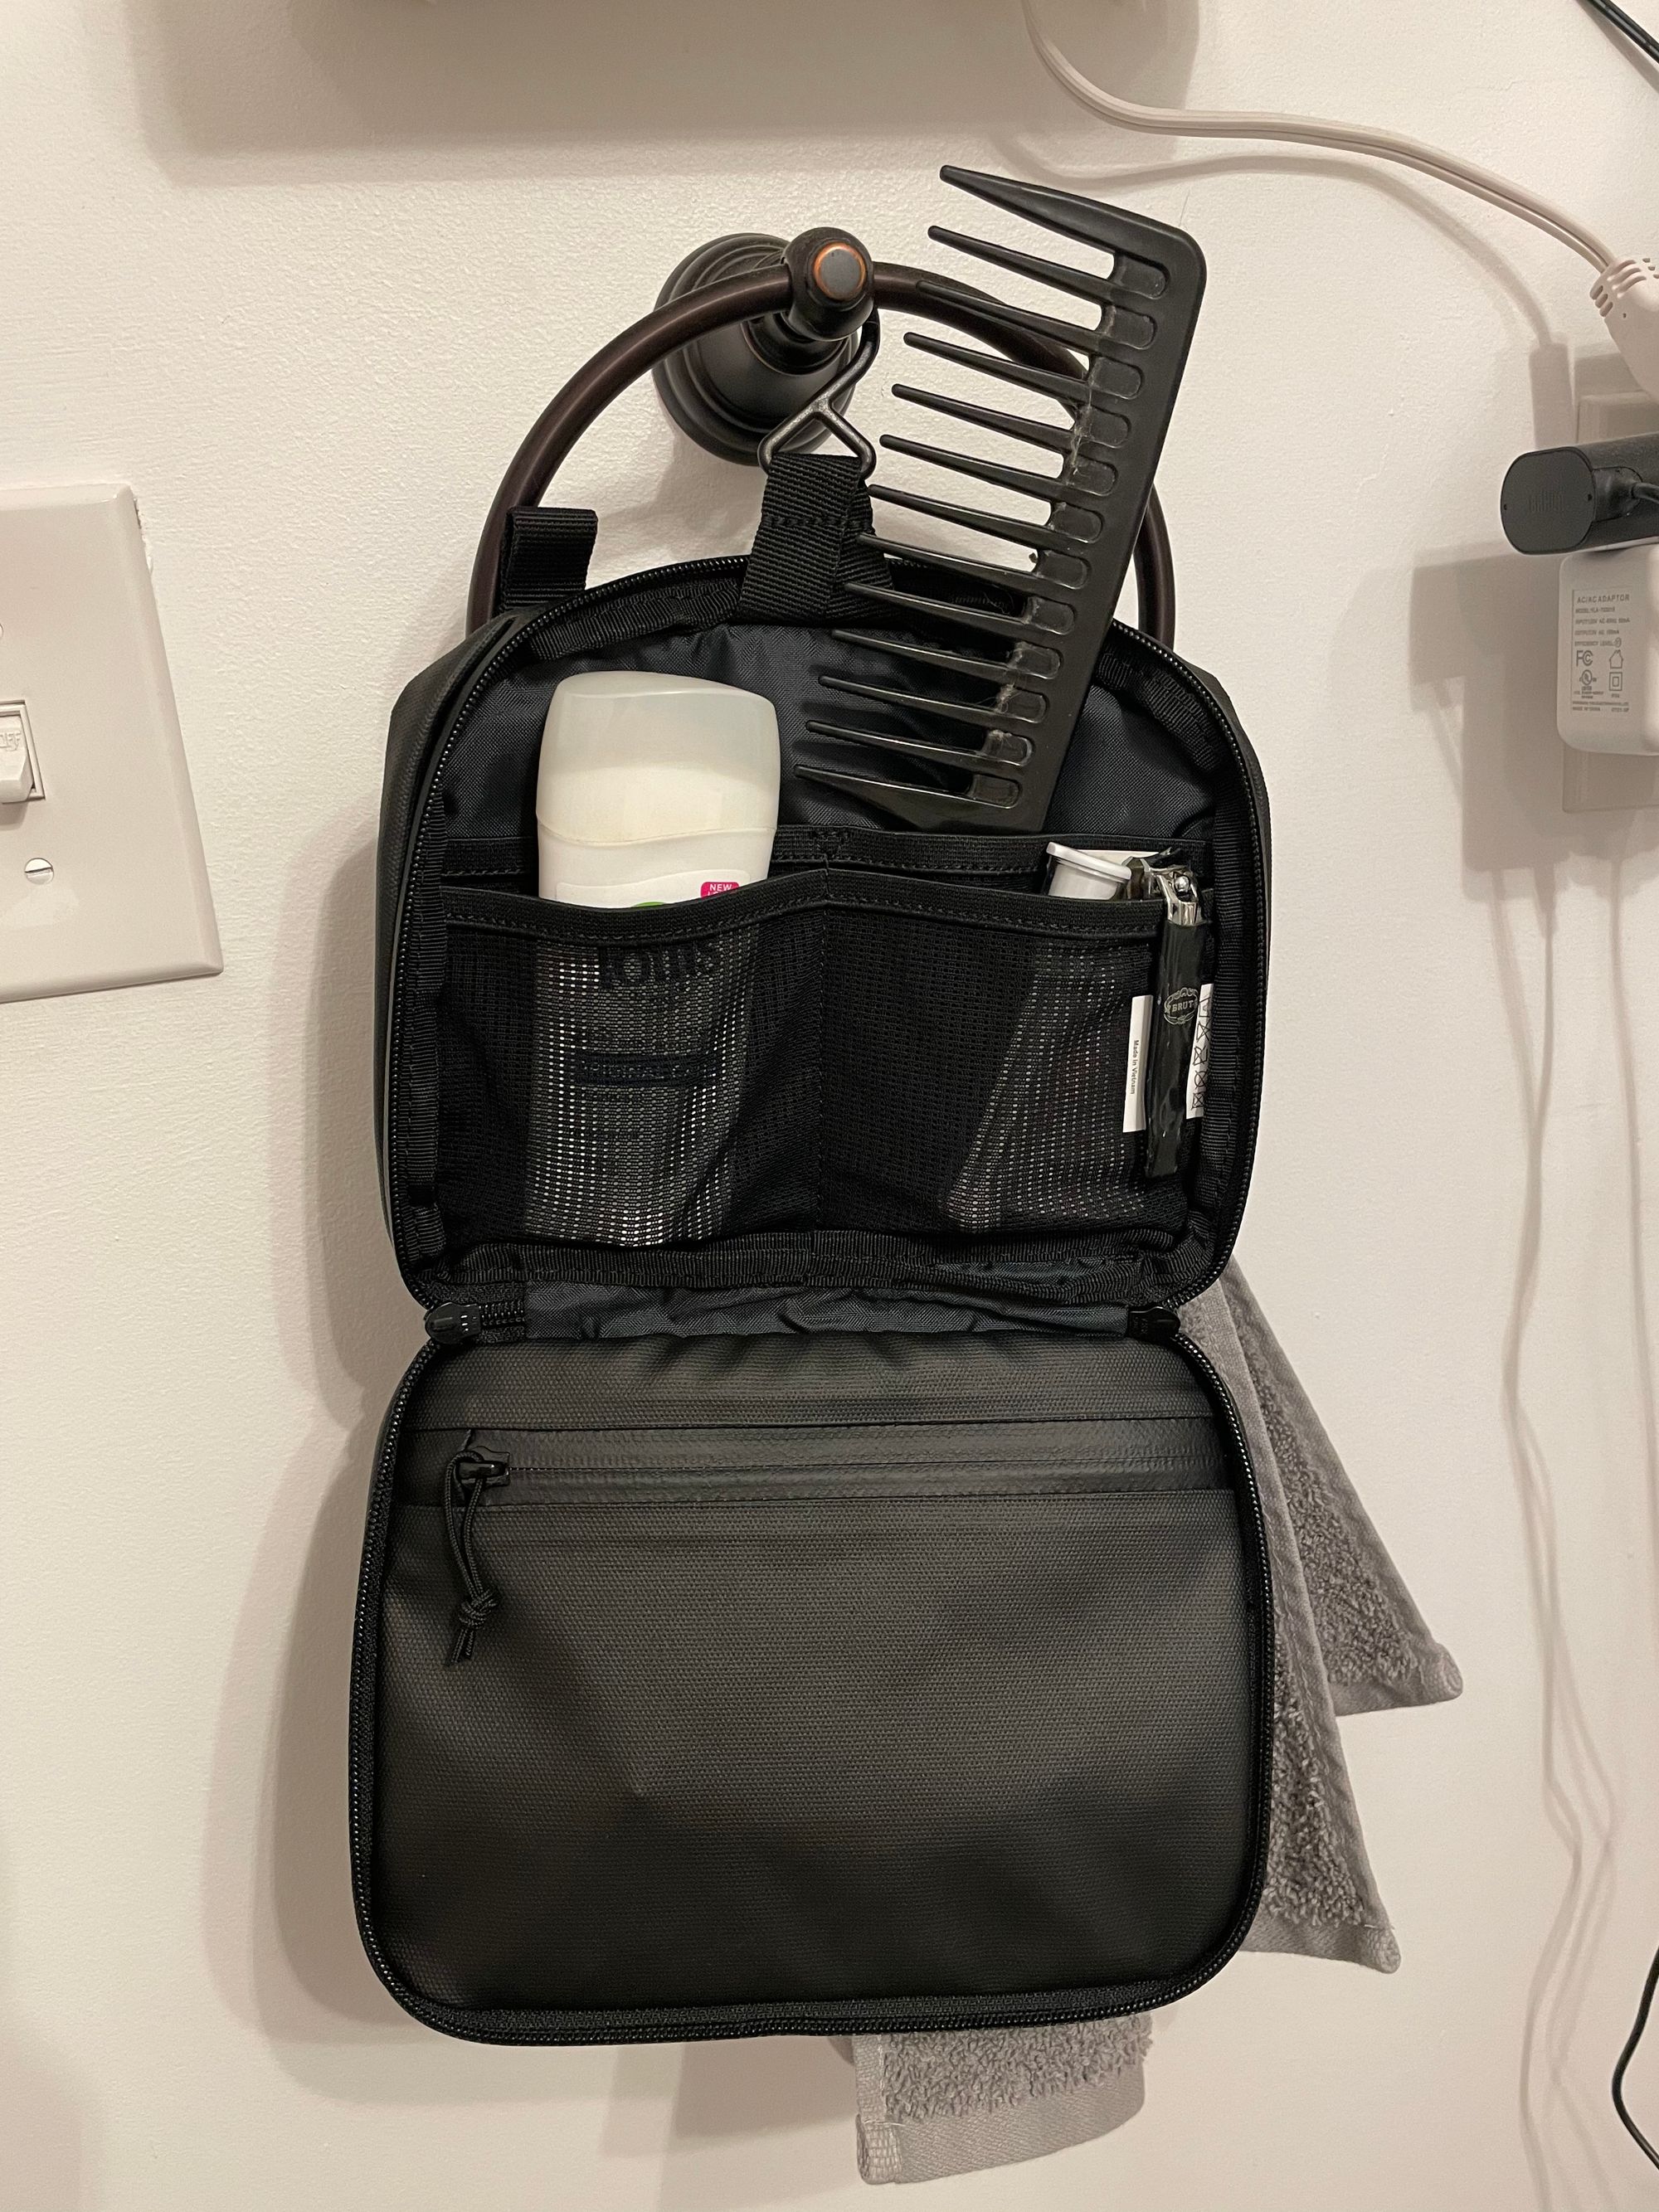 A small toiletry bag hangs on a hook. Deodorant and a comb are visible. 